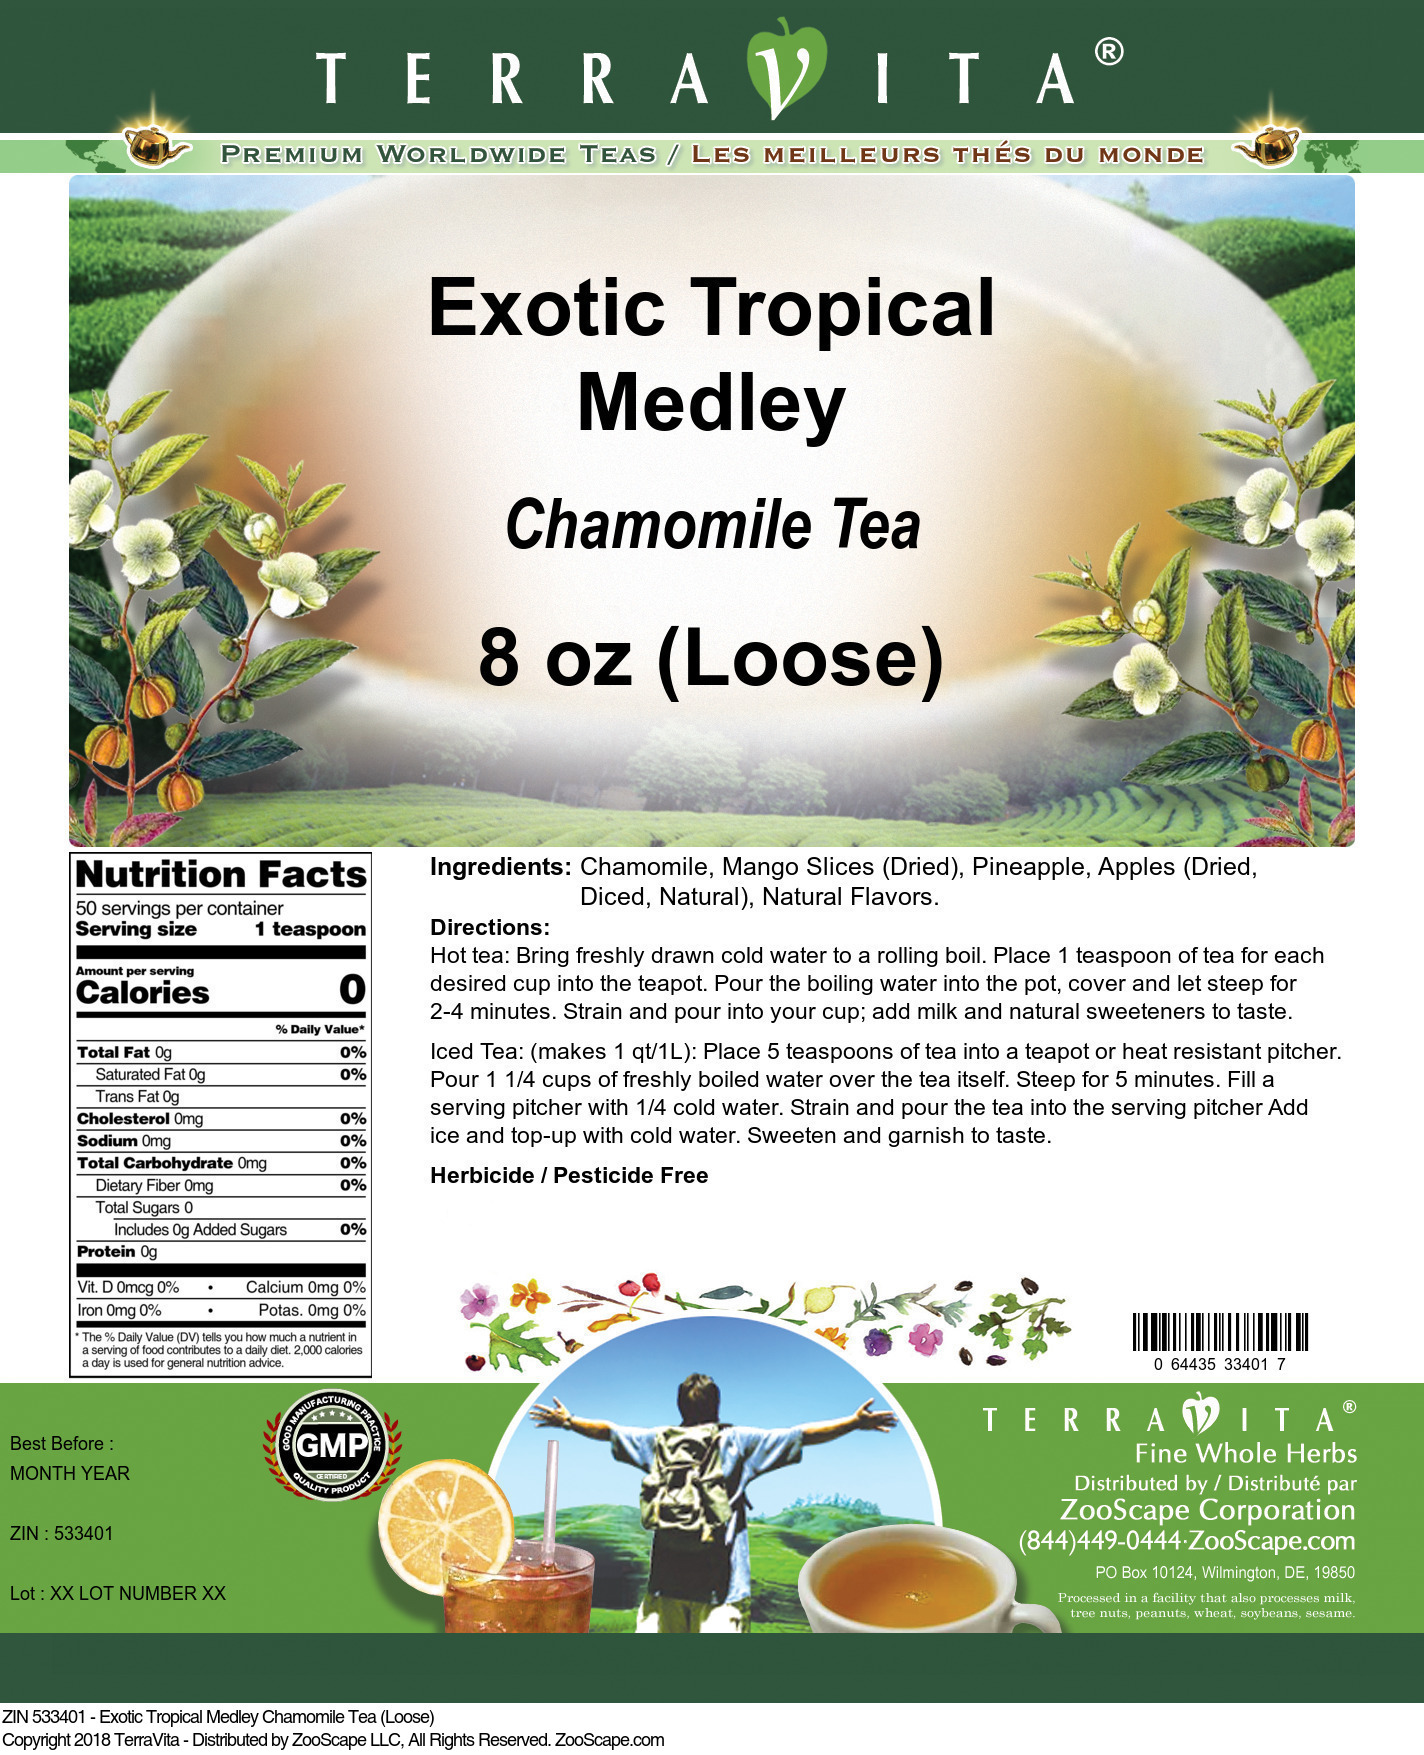 Exotic Tropical Medley Chamomile Tea (Loose) - Label